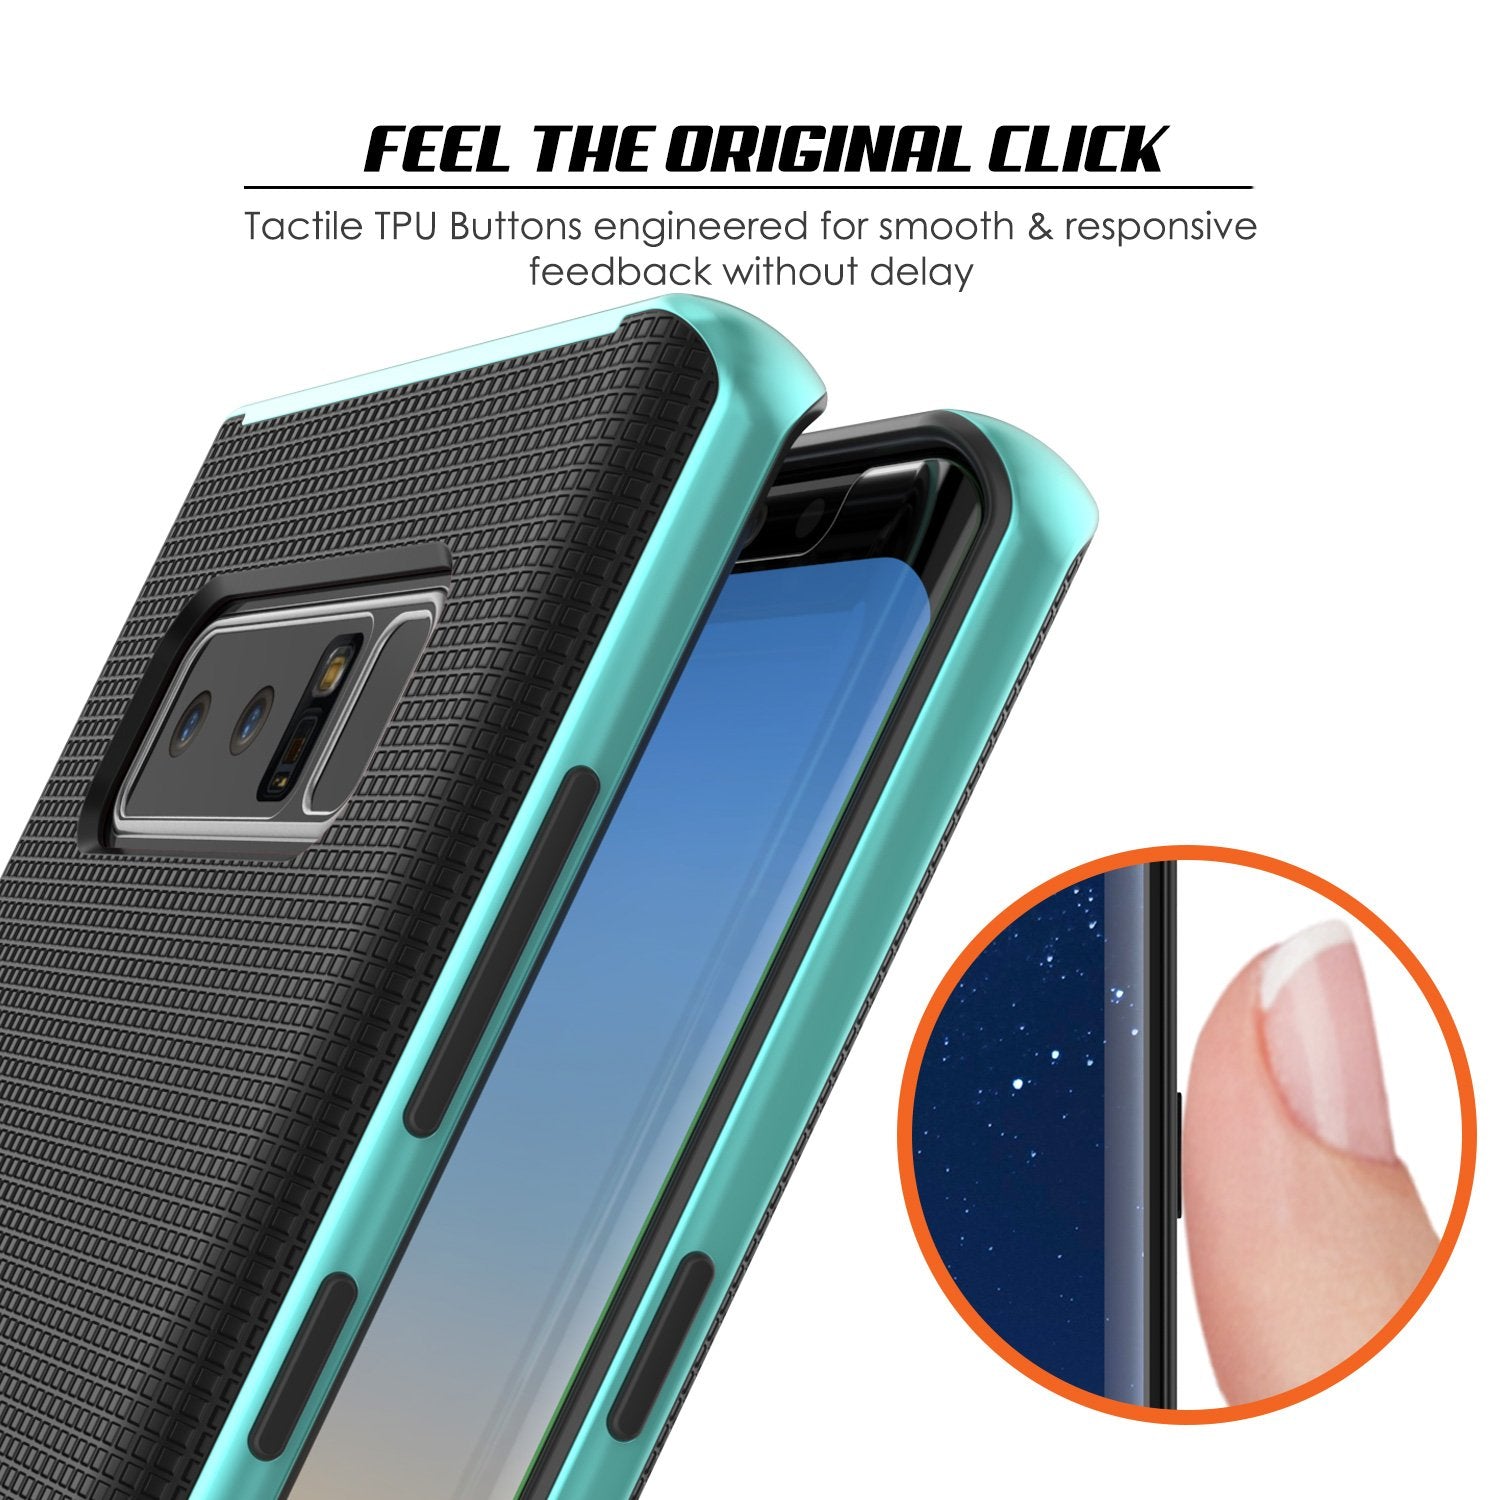 Galaxy Note 8 Screen/Shock Protective Dual Layer Case [Teal]